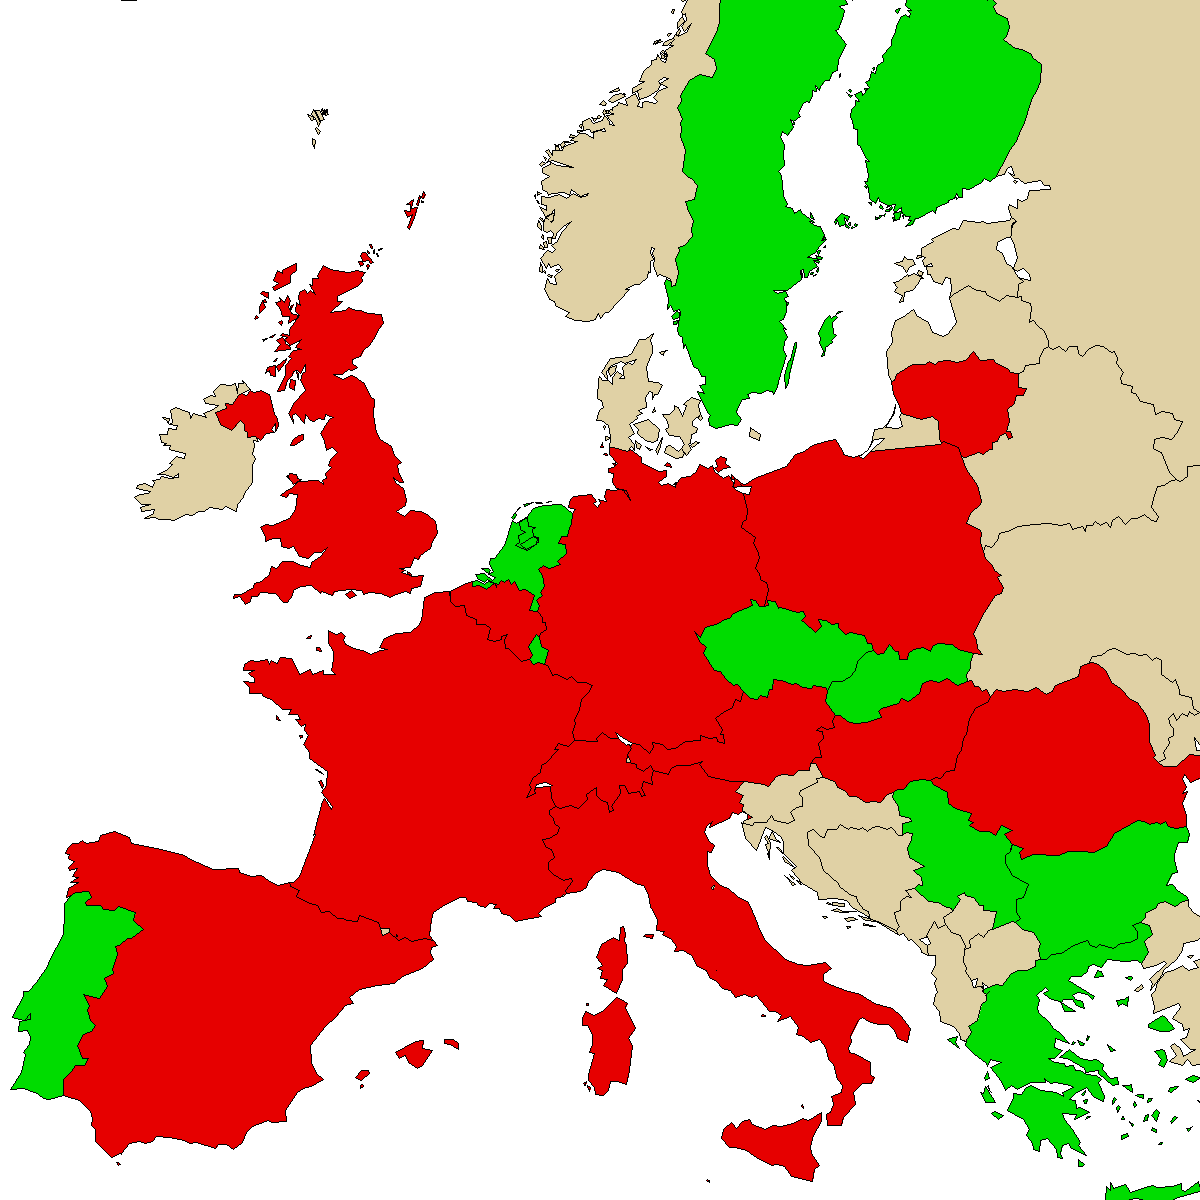 legal info map for our product 4Me-NEB, green are countries where we found no ban, red with ban, grey is unknown